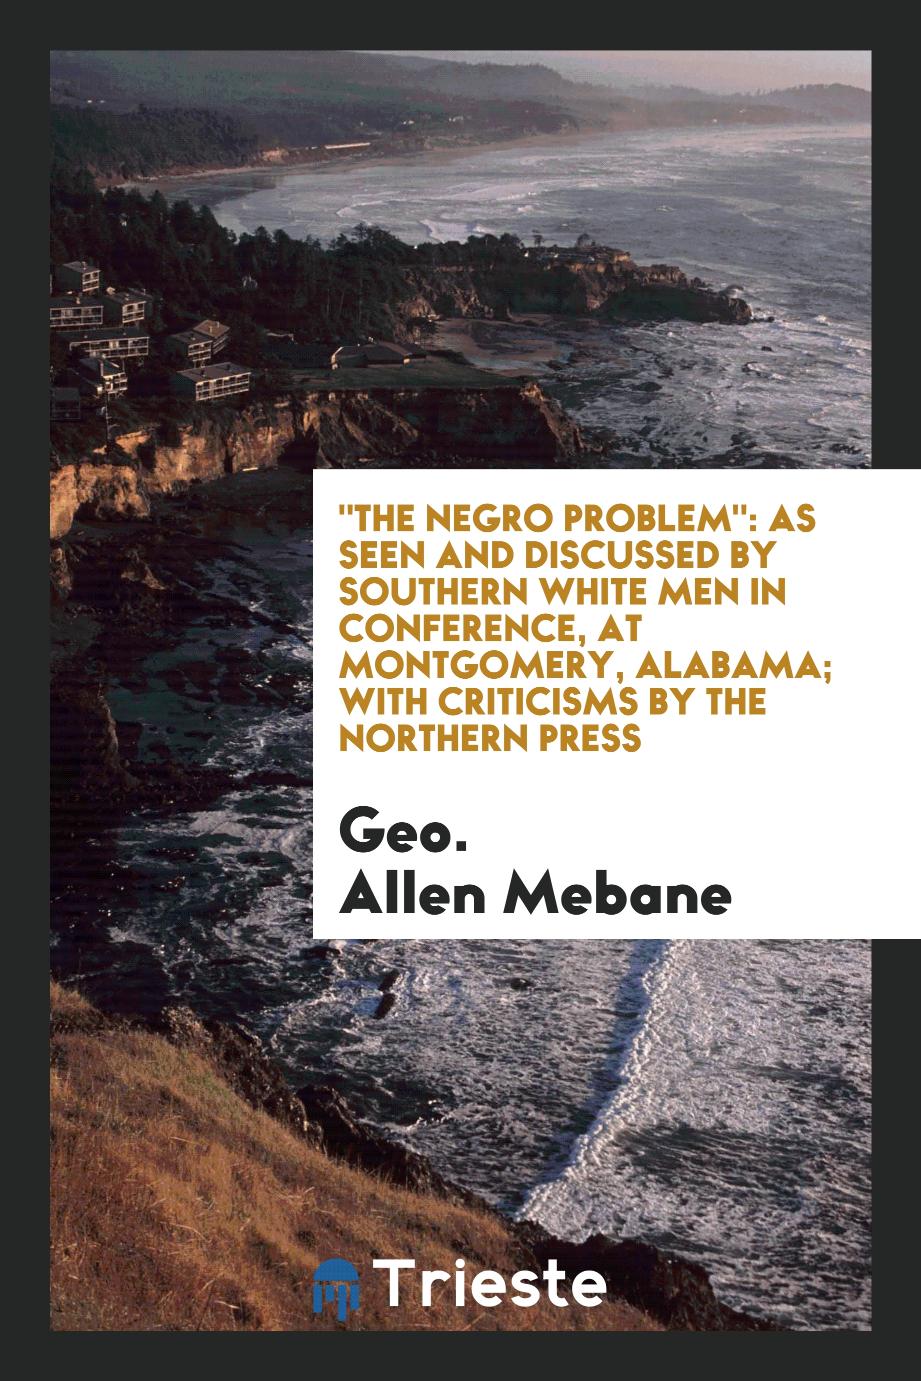 "The Negro Problem": As Seen and Discussed by Southern White Men in Conference, at Montgomery, Alabama; With Criticisms by the Northern Press